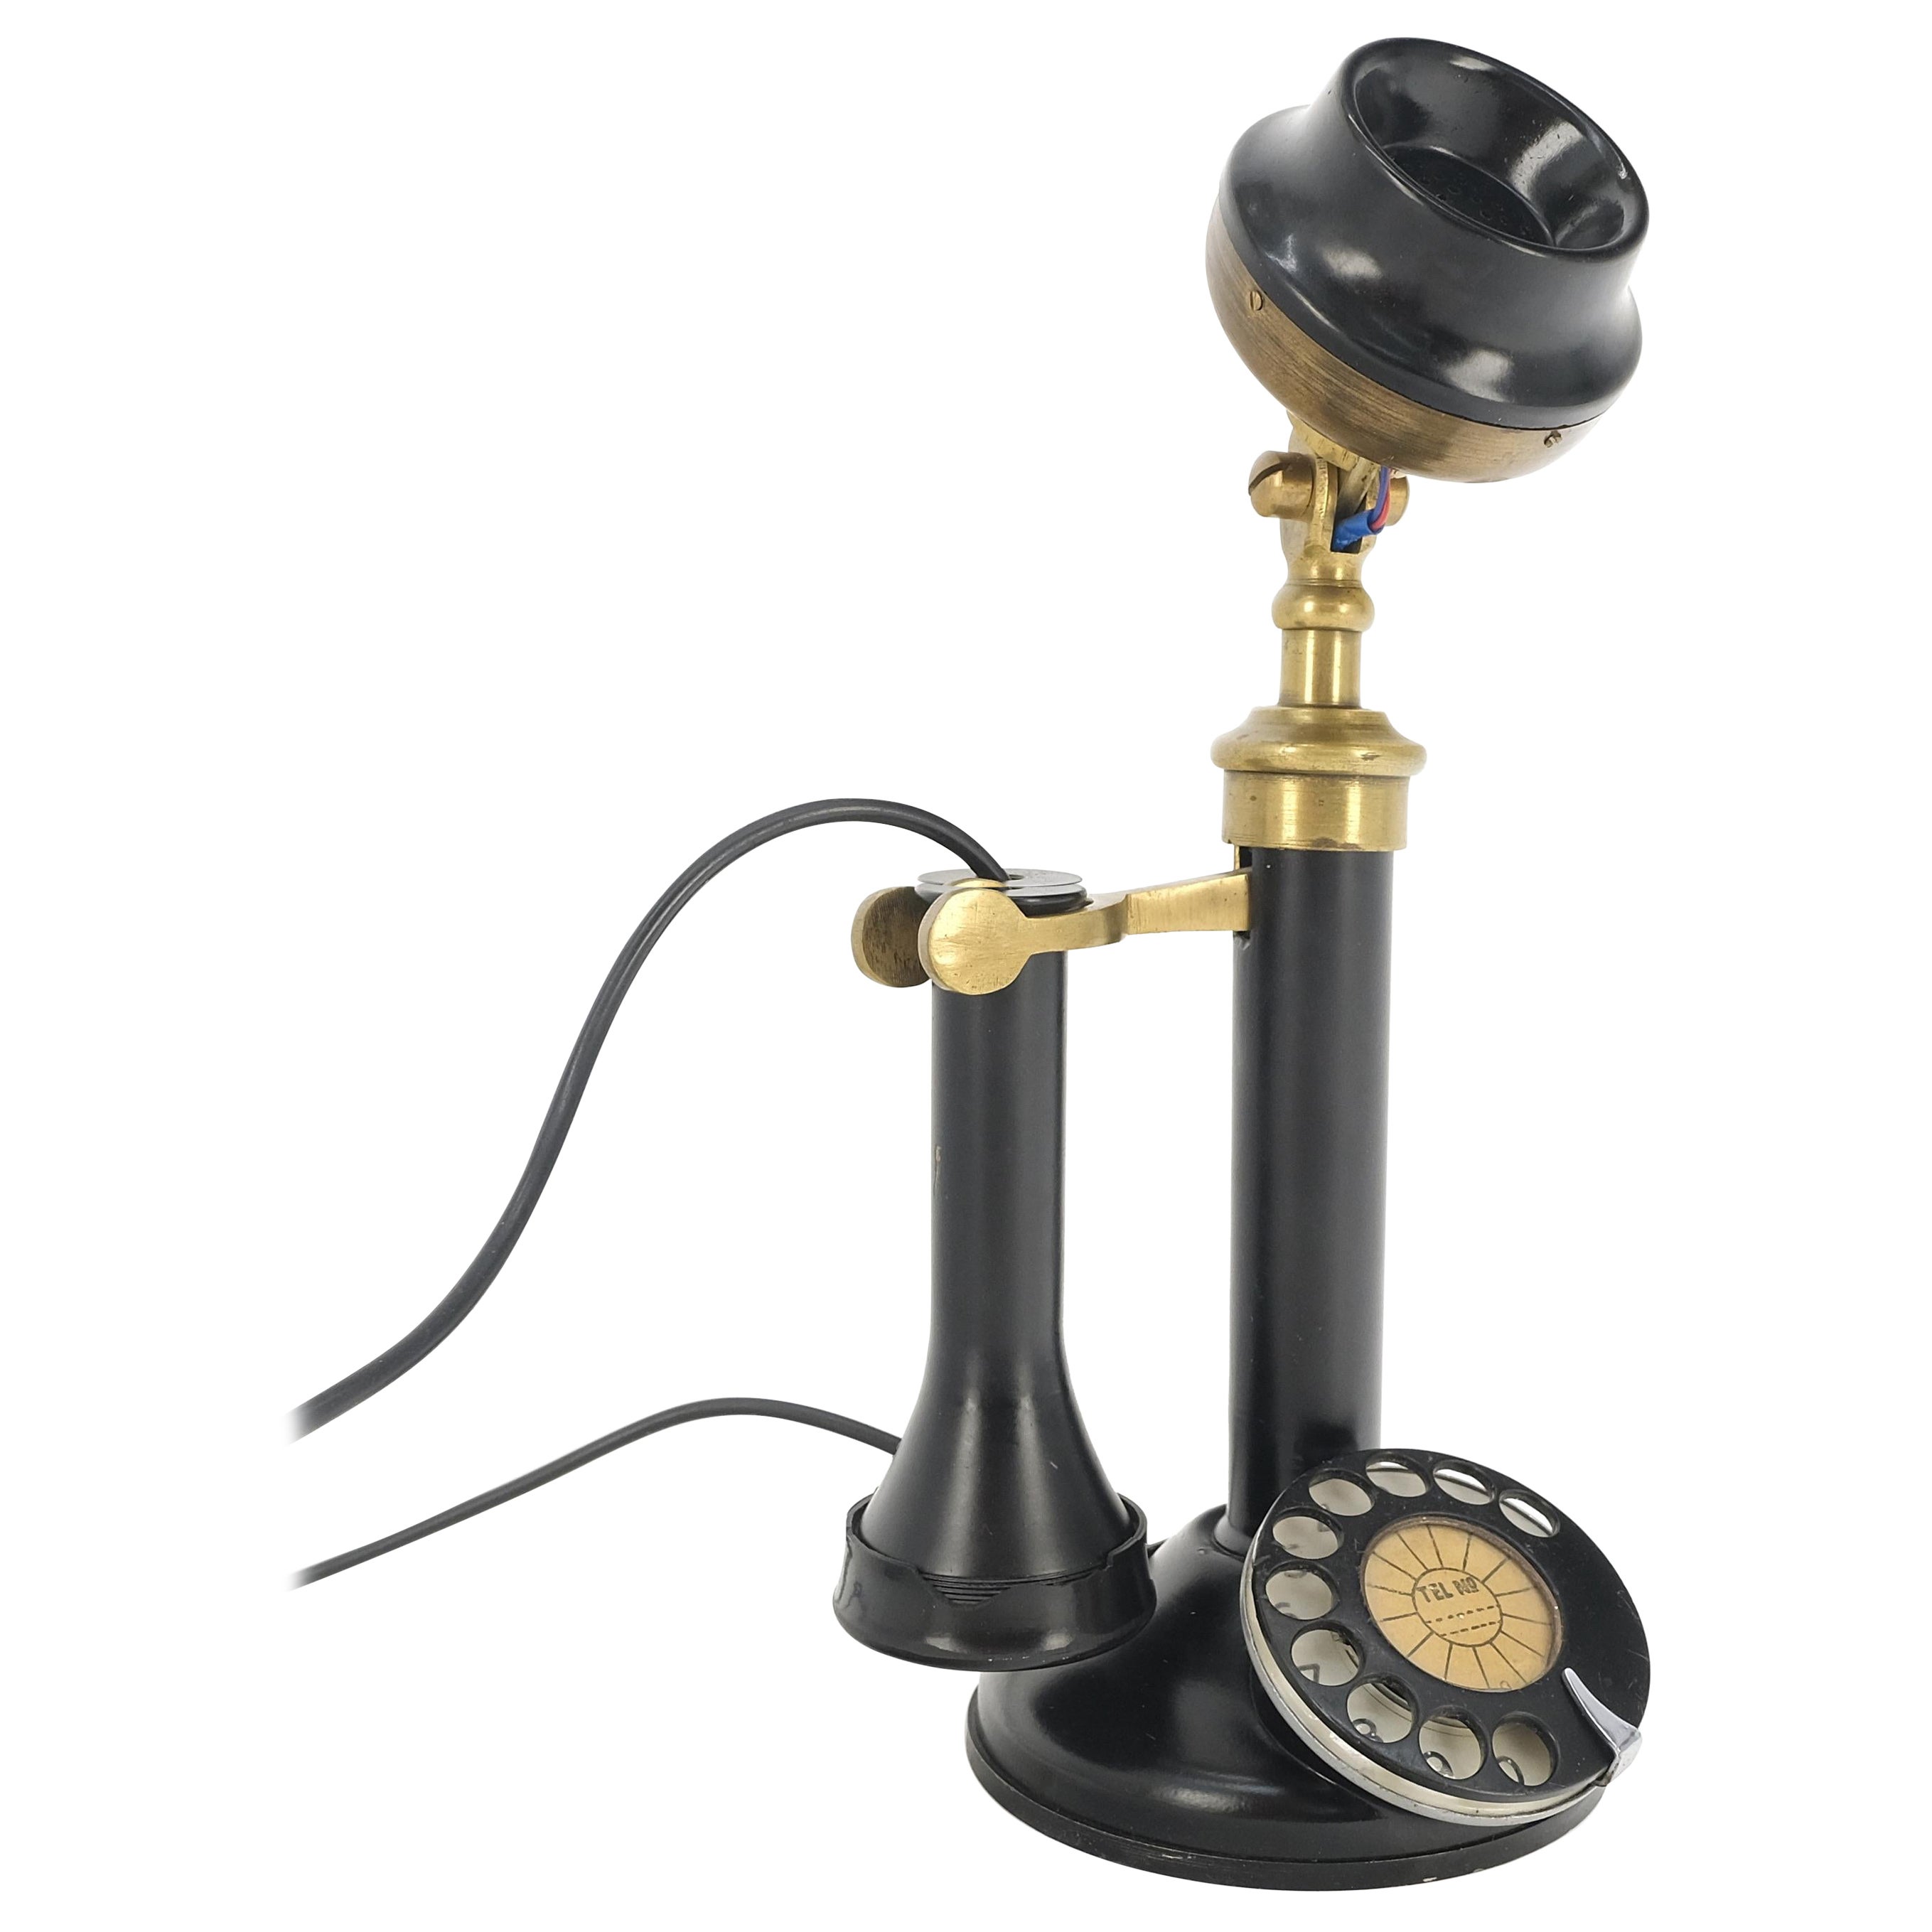 What was the first telephone made out of?